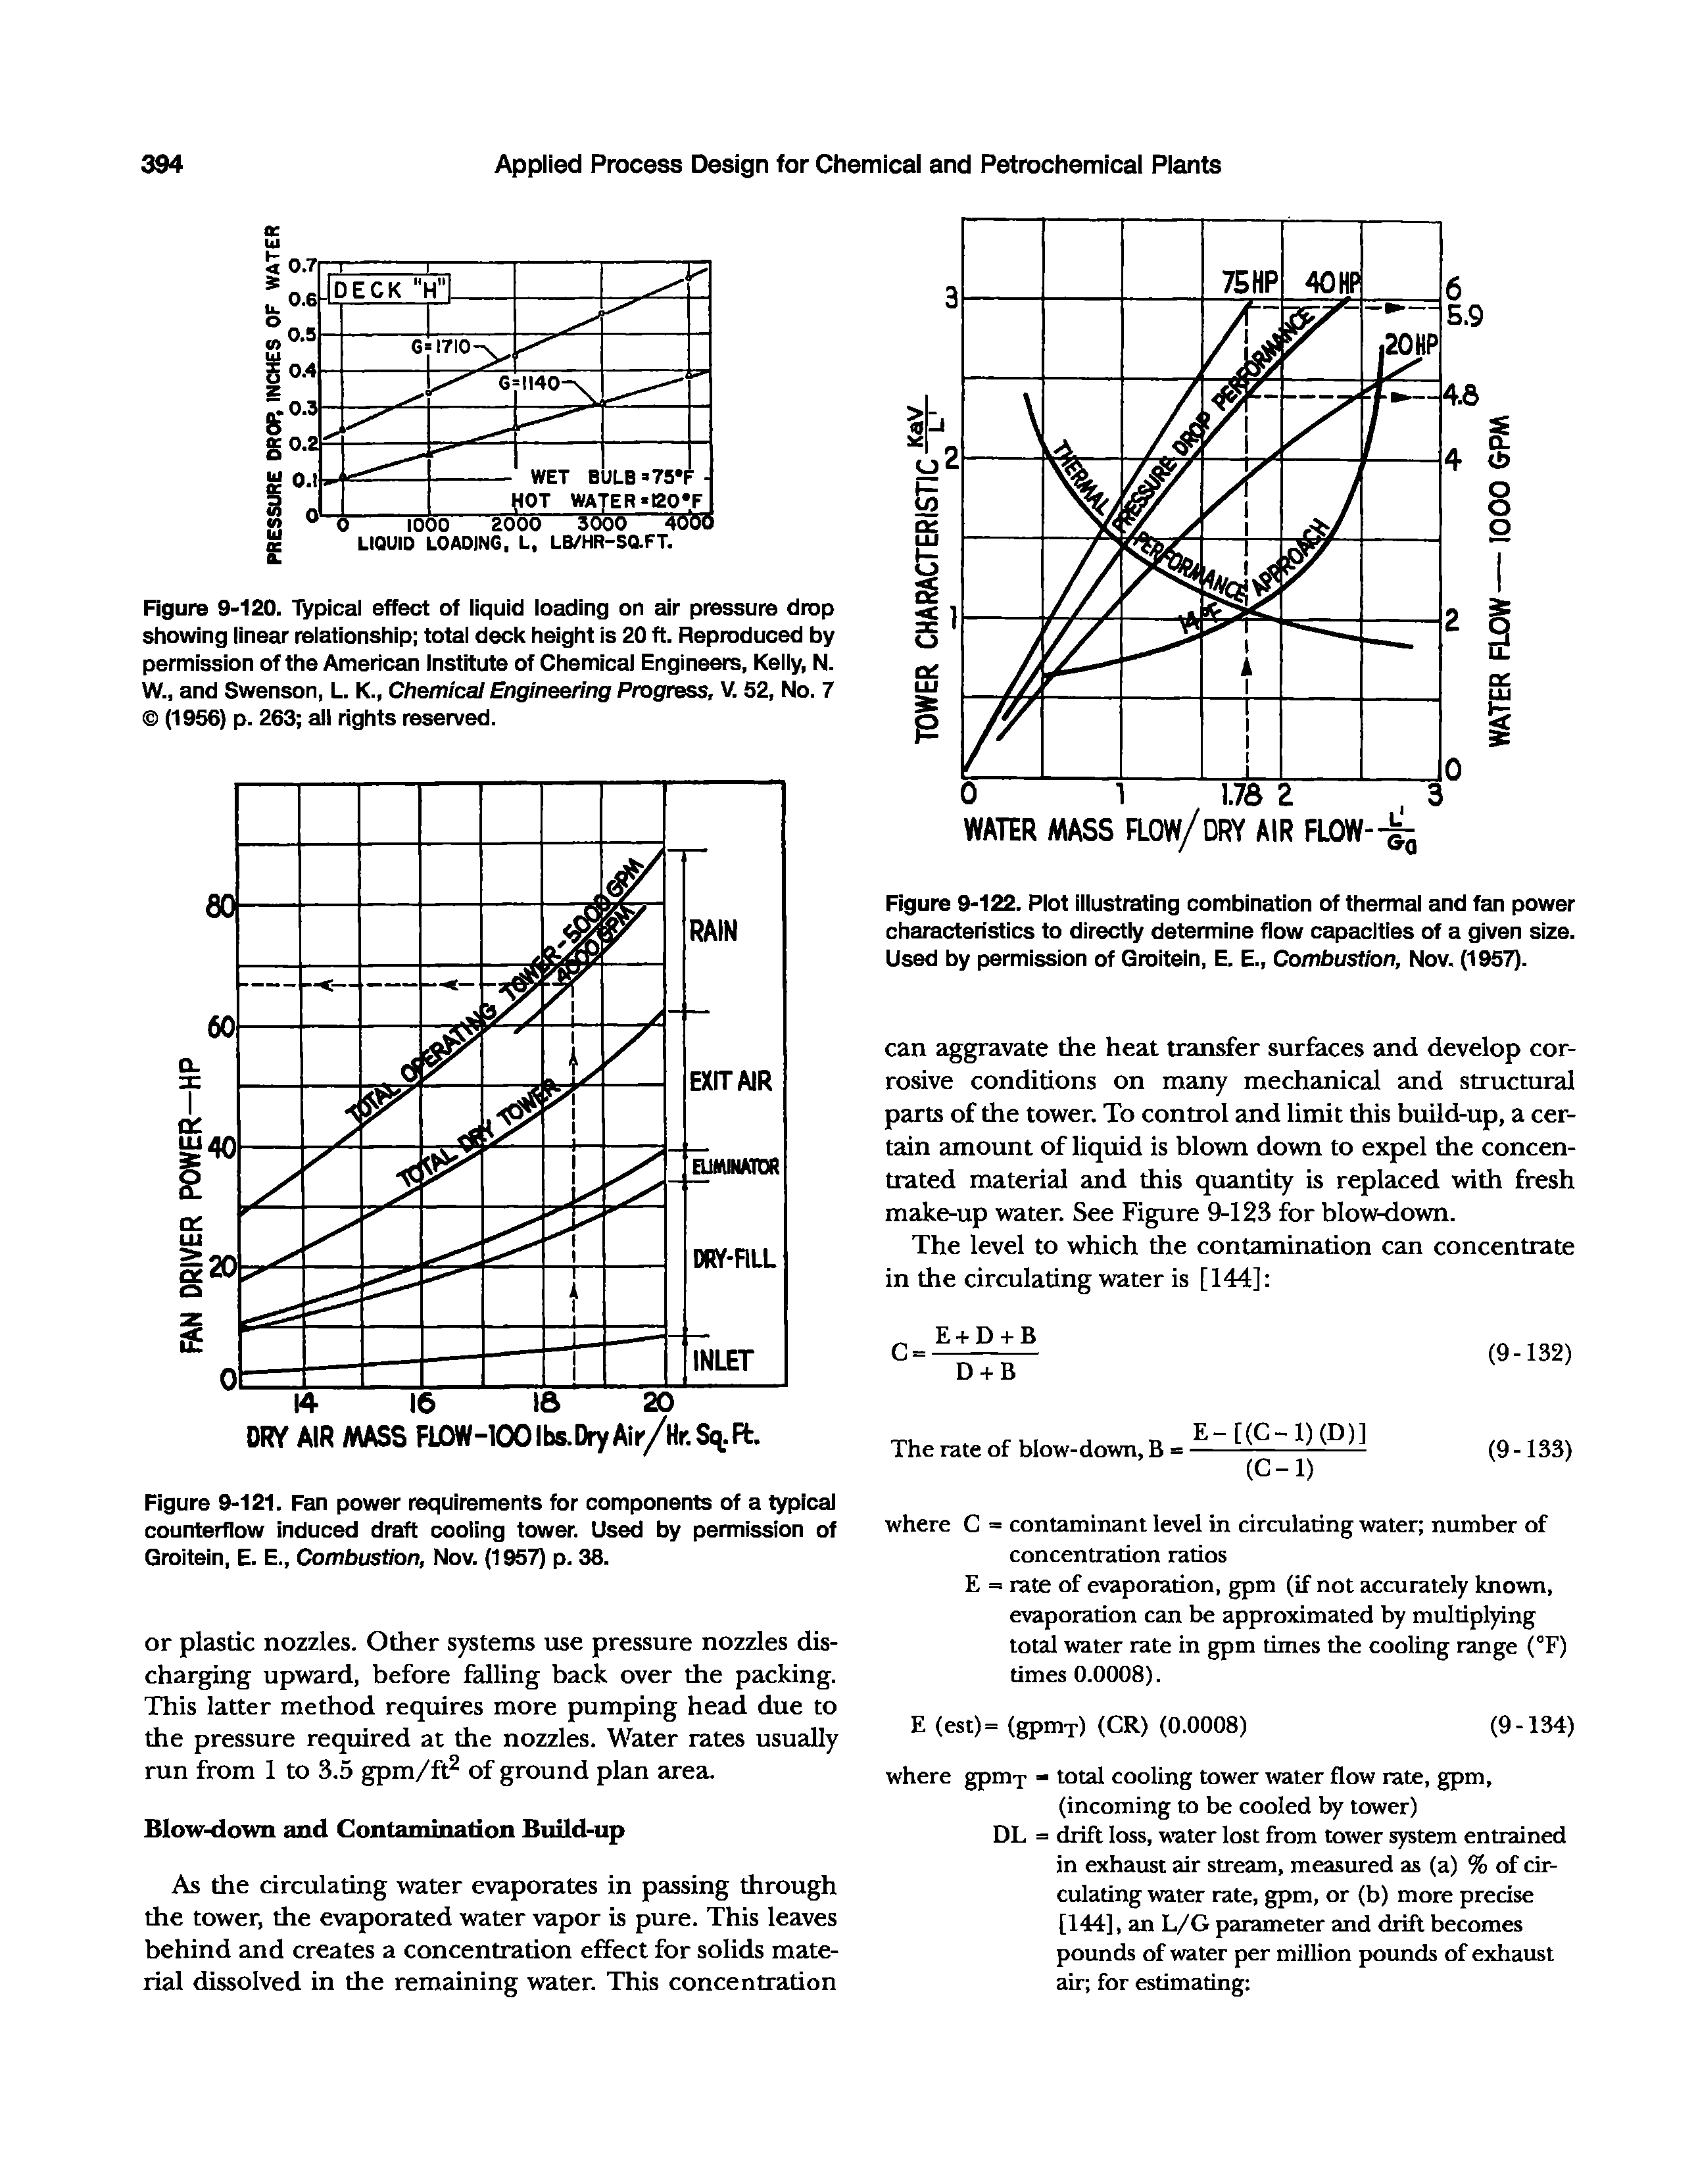 Figure 9-120. Typical effect of iiquid ioading on air pressure drop showing lineeir relationship total deck height is 20 ft. Reproduced by permission of the American Institute of Chemical Engineers, Kelly, N. W., and Swenson, L. K., Chemical Engineering Progress, V. 52, No. 7 (1956) p. 263 all rights reserved.